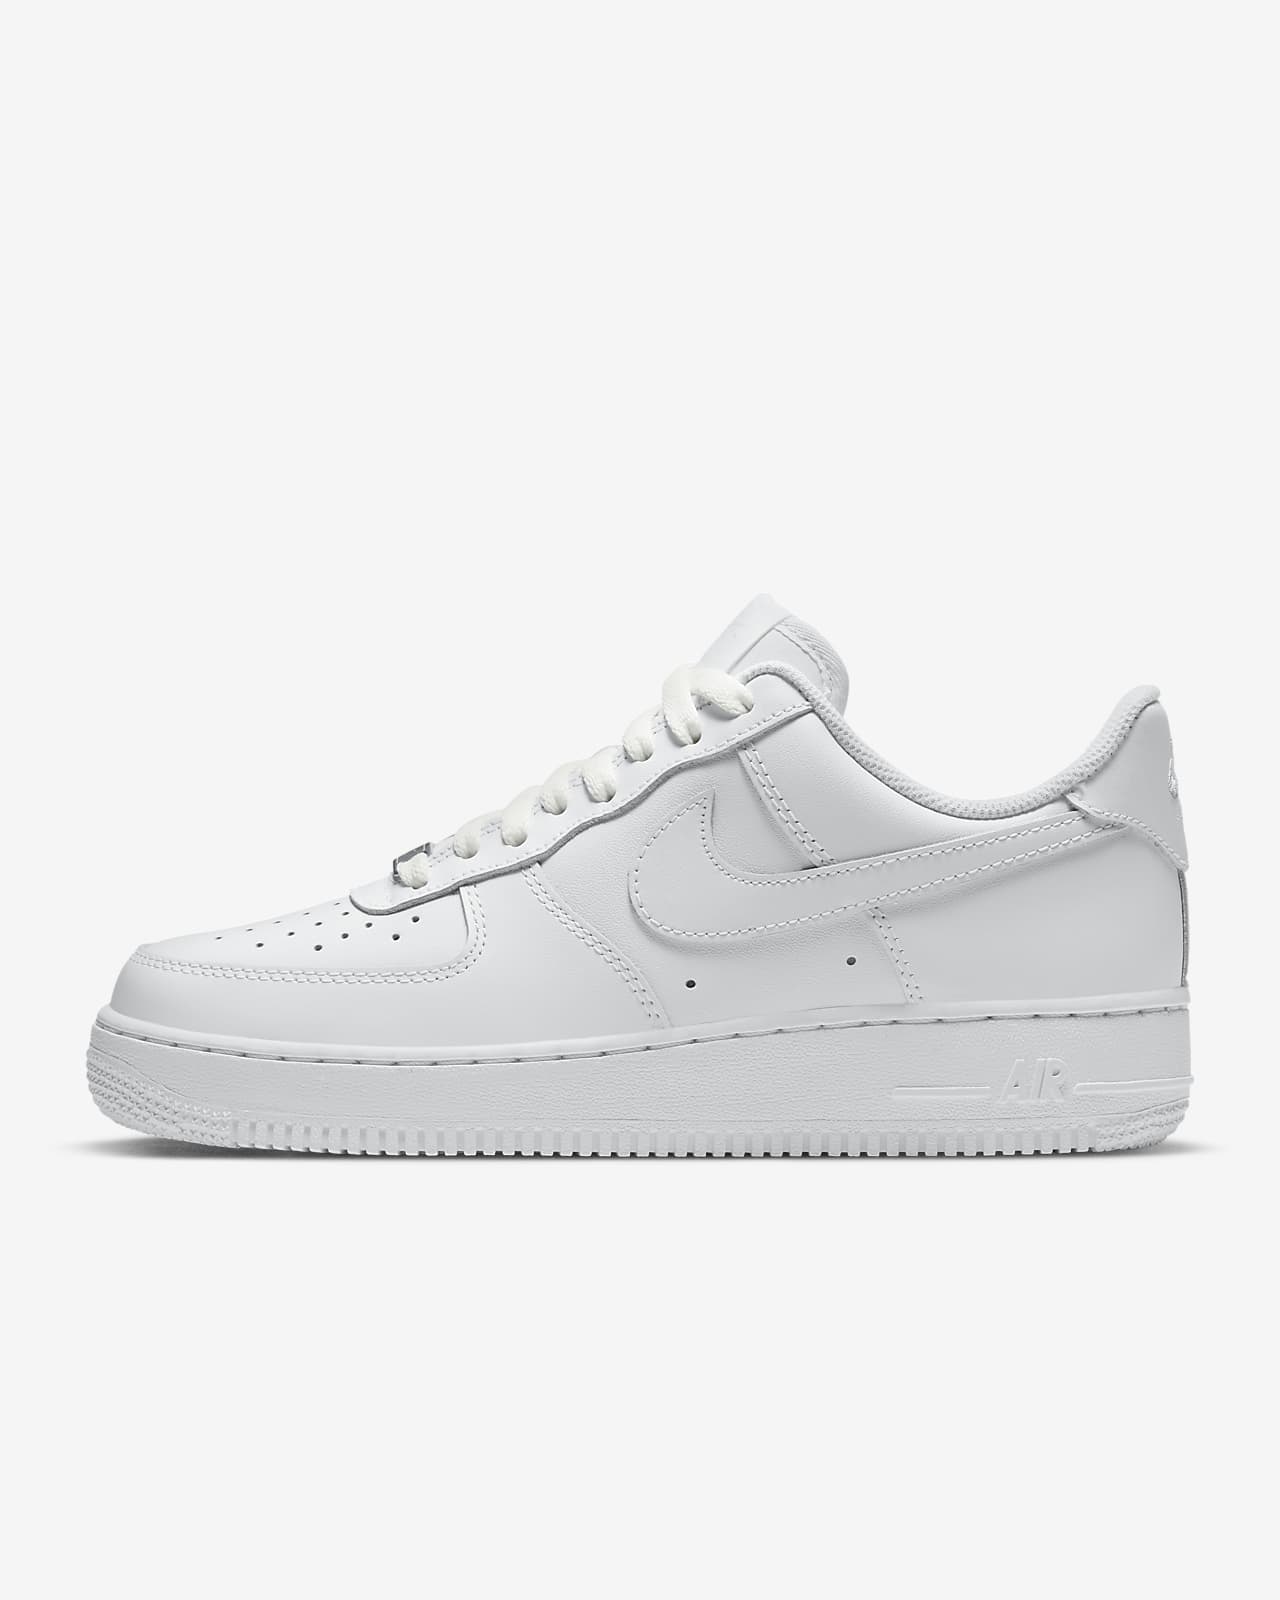 Bloom Surrender exaggeration Nike Air Force 1 '07 Women's Shoes. Nike.com